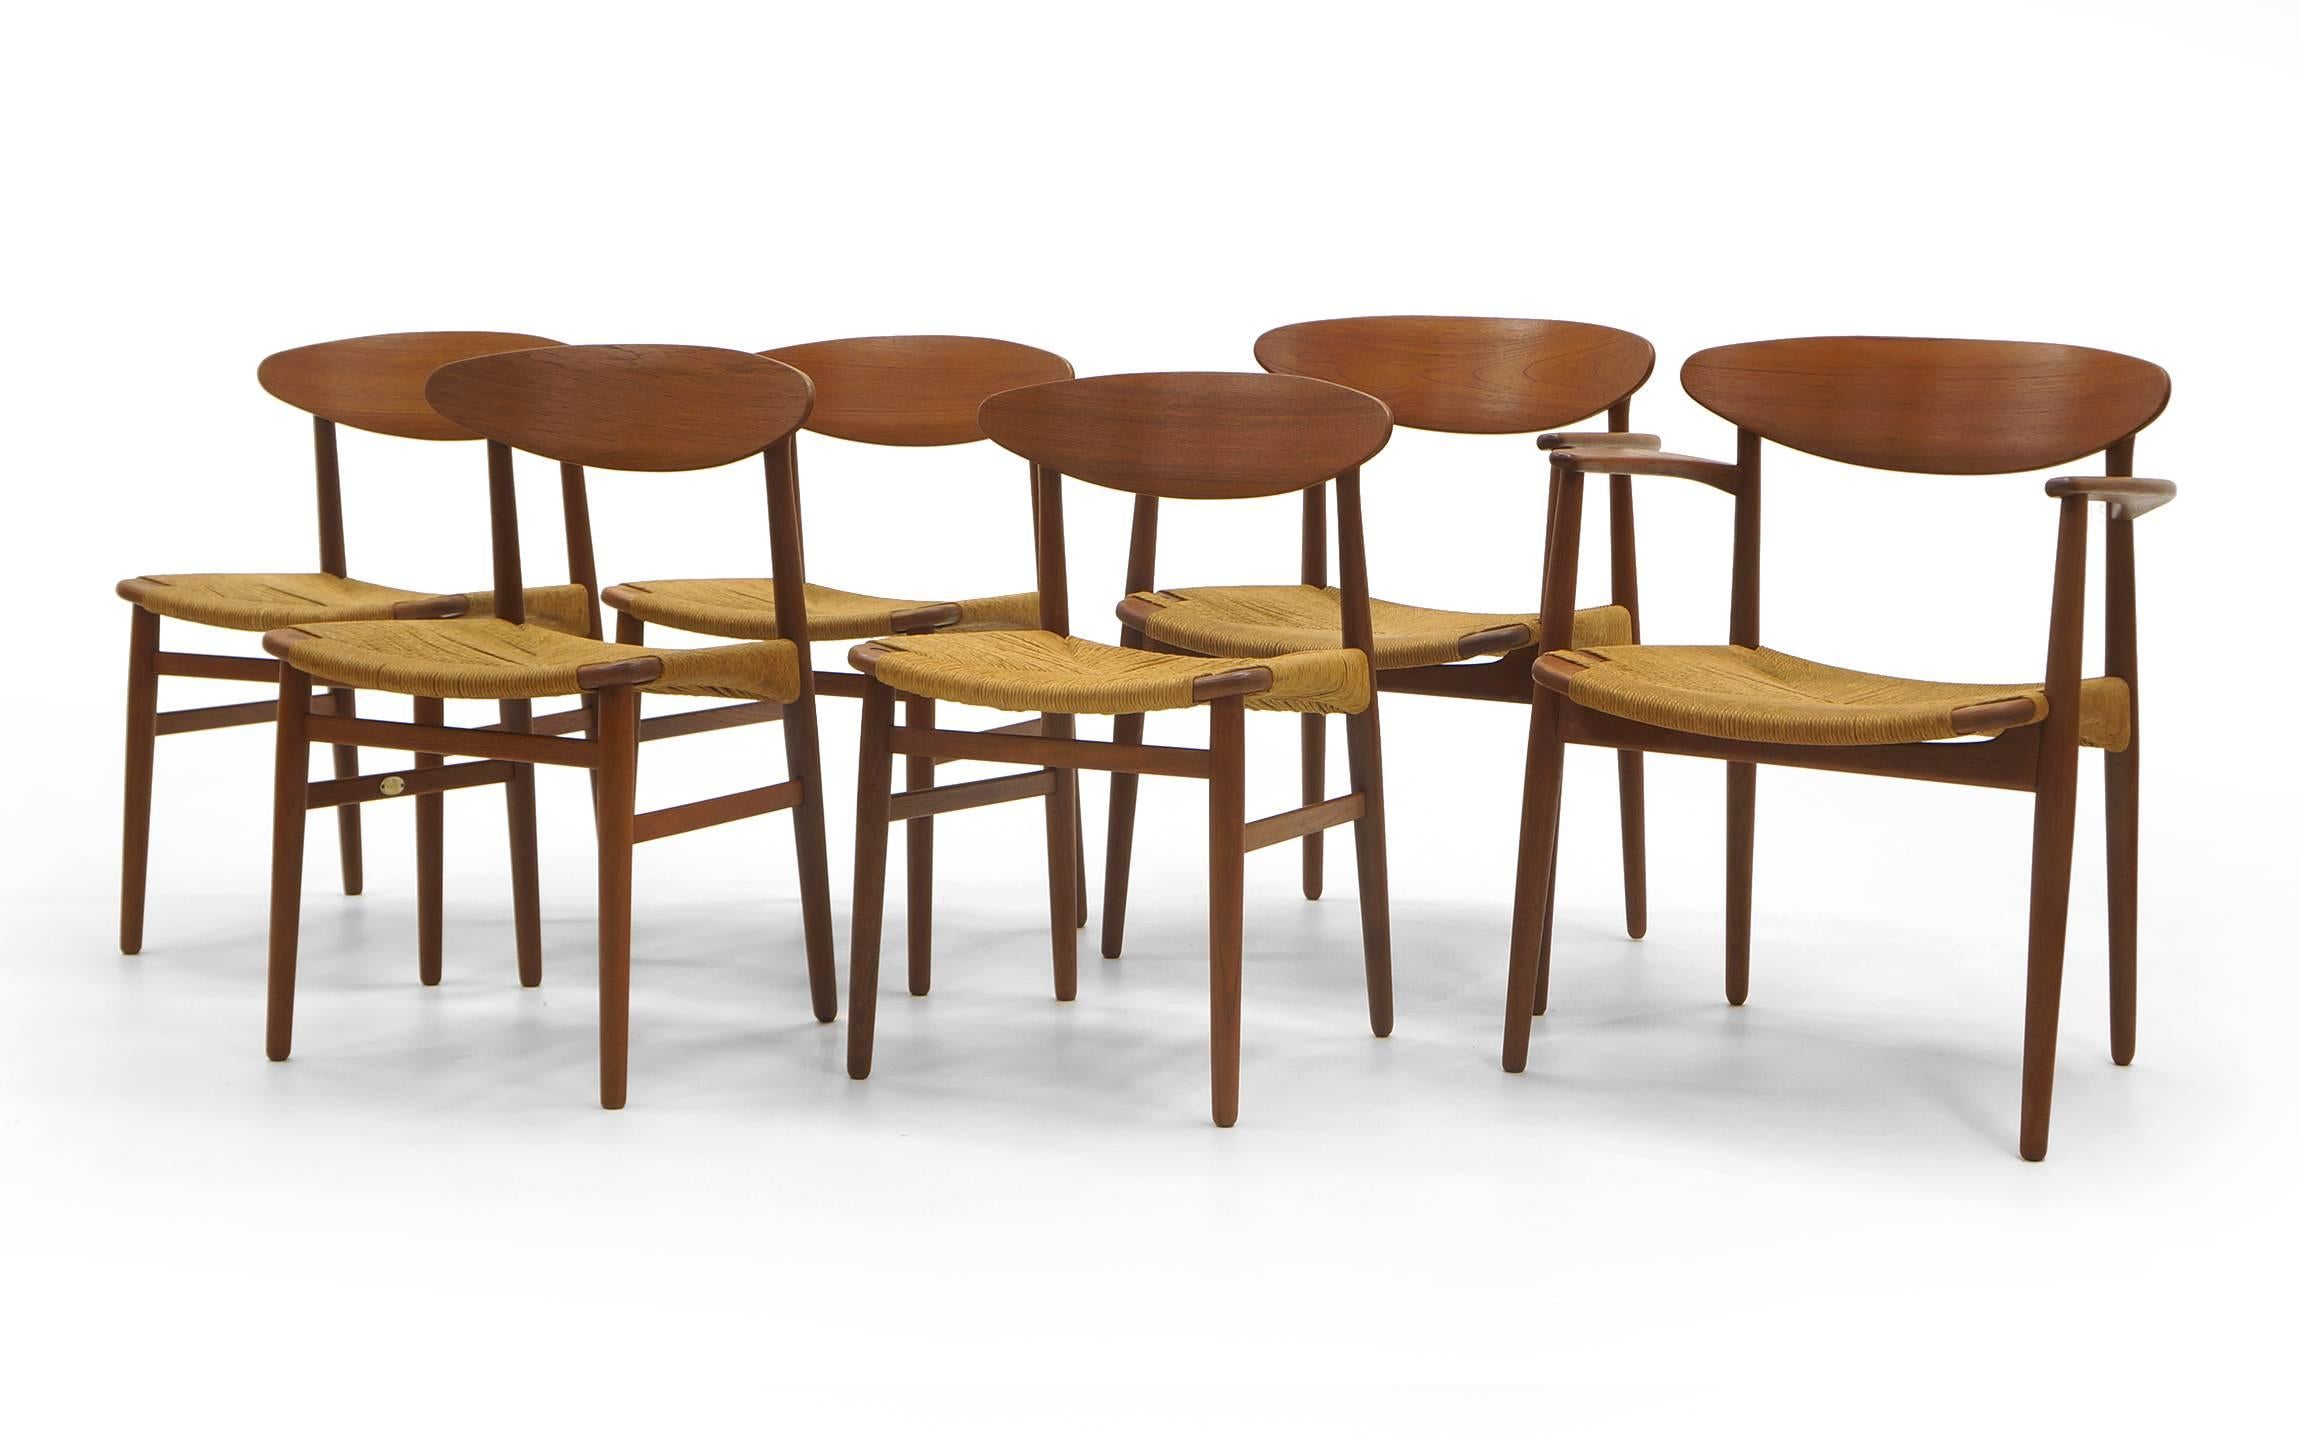 Set of six teak dining chairs with original woven grass rope seats designed by Ejner Larsen and Aksel Madsen for Naestved Mobelfabrik. Two armchairs and four side chairs. The frames have been expertly restored and refinished, the rope seats have